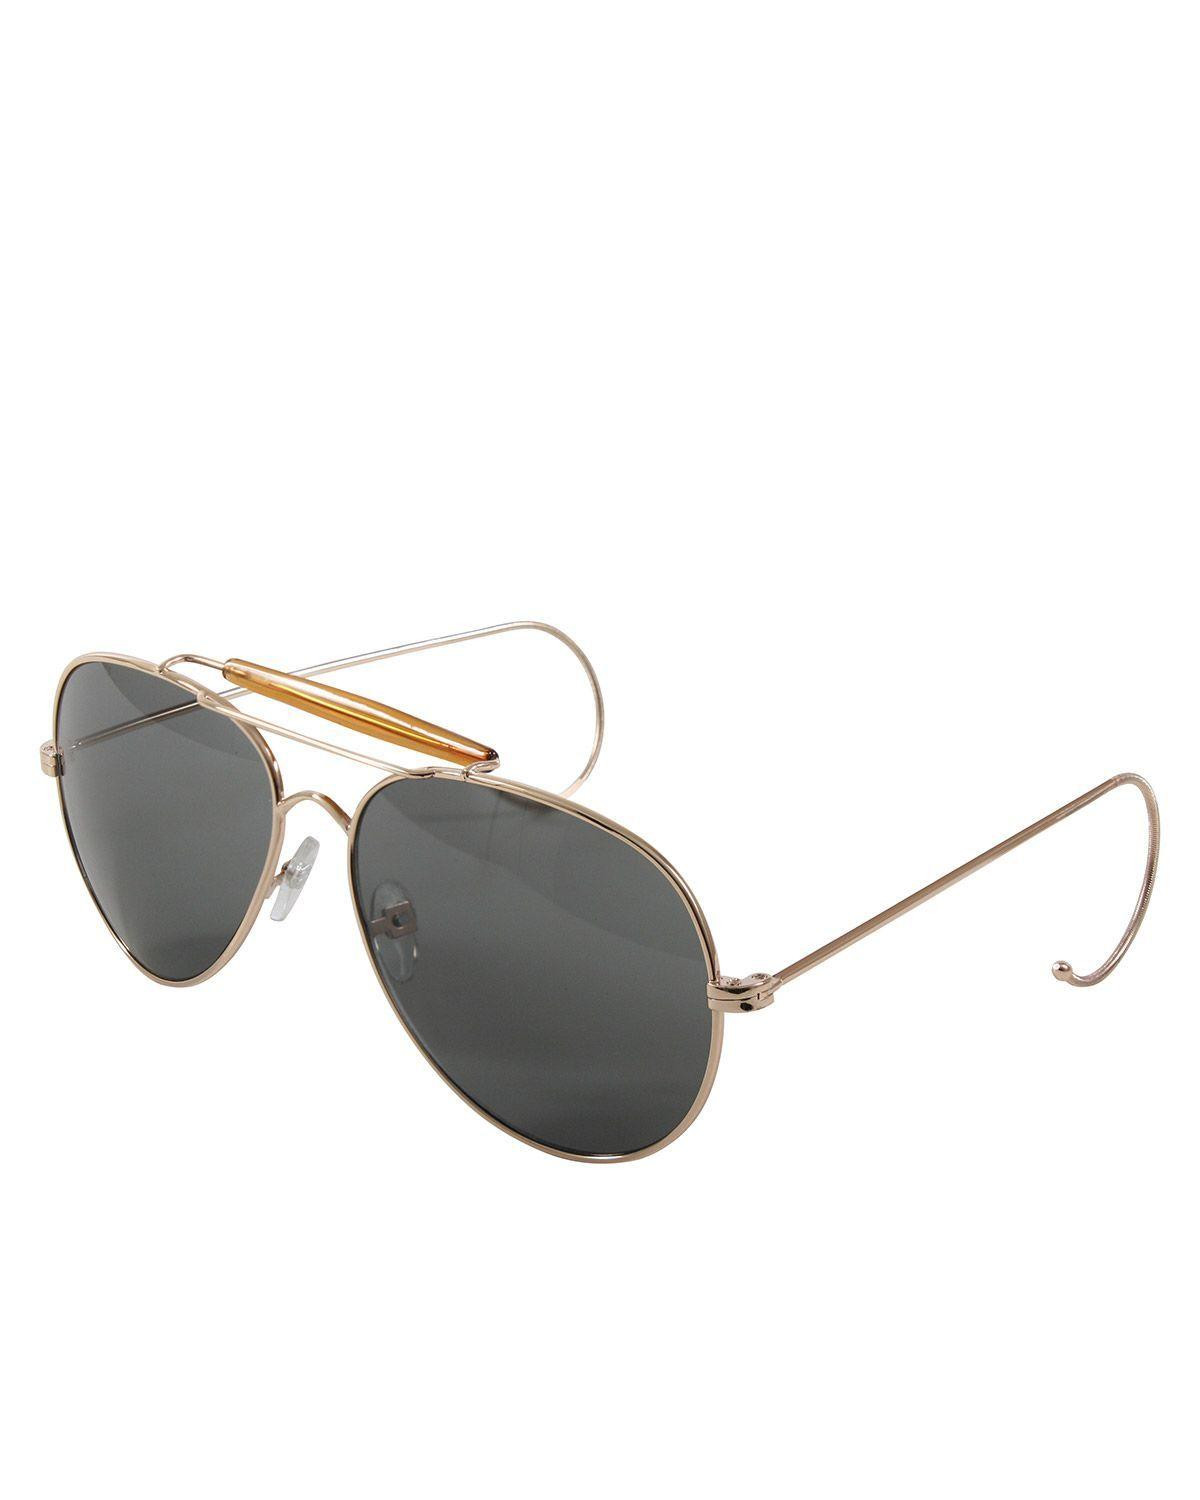 7: Rothco Air Force Pilot Solbriller - G.I. Type (Guld m. Røget Glas, One Size)